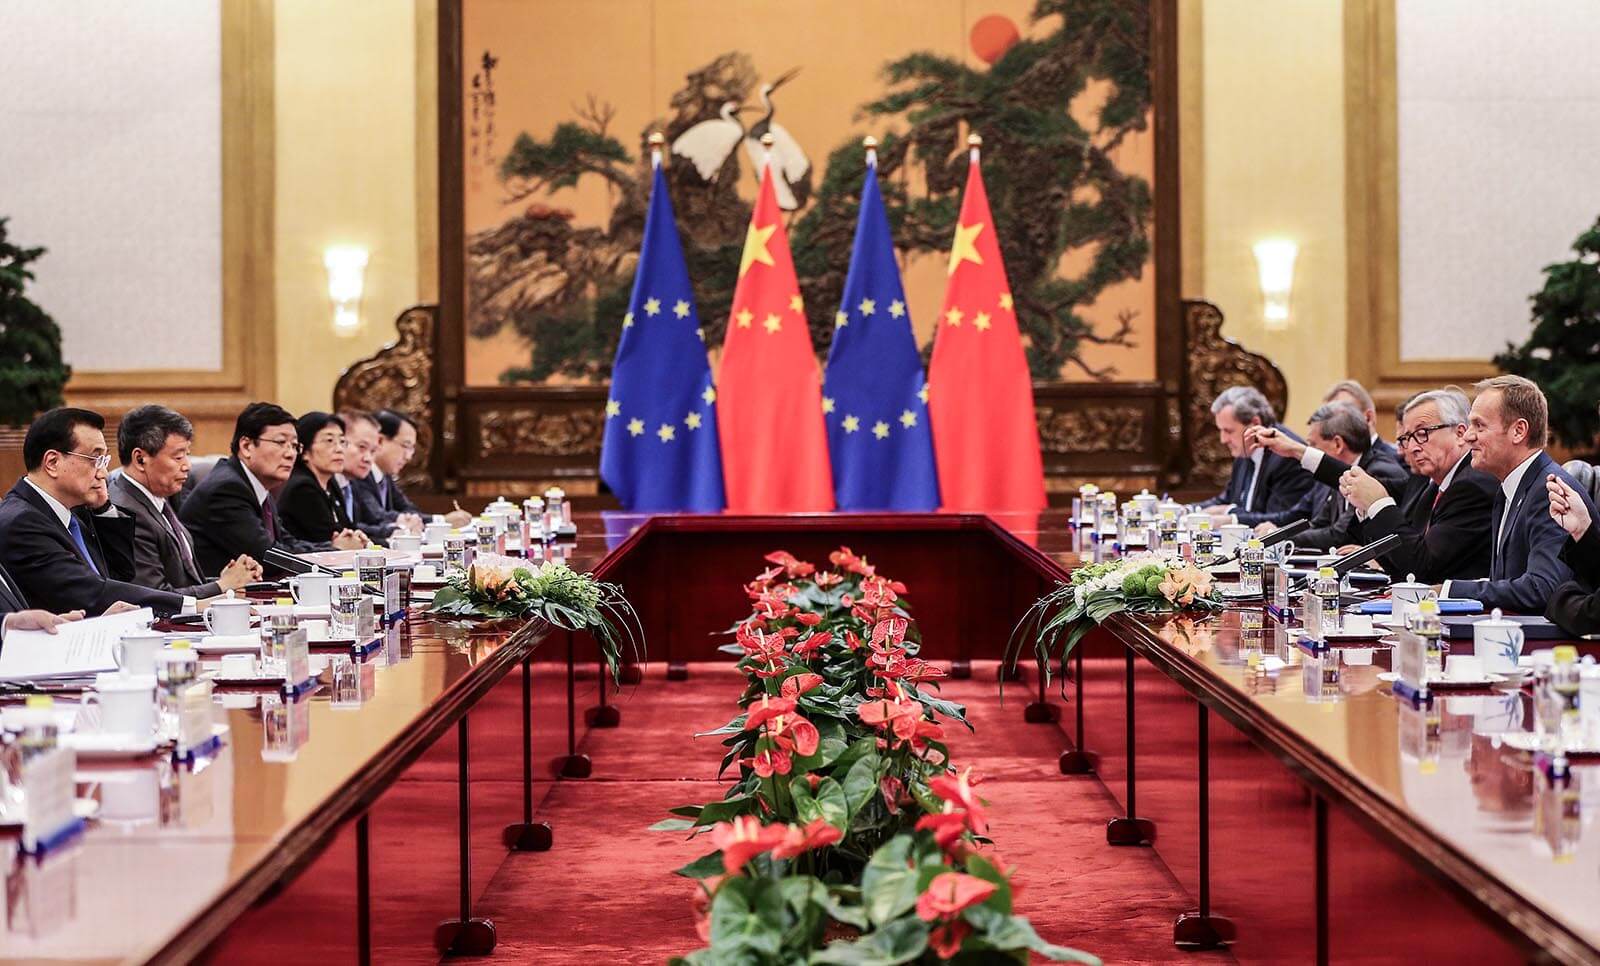 European Countries Discuss Projects to Counter China’s Belt and Road Initiative